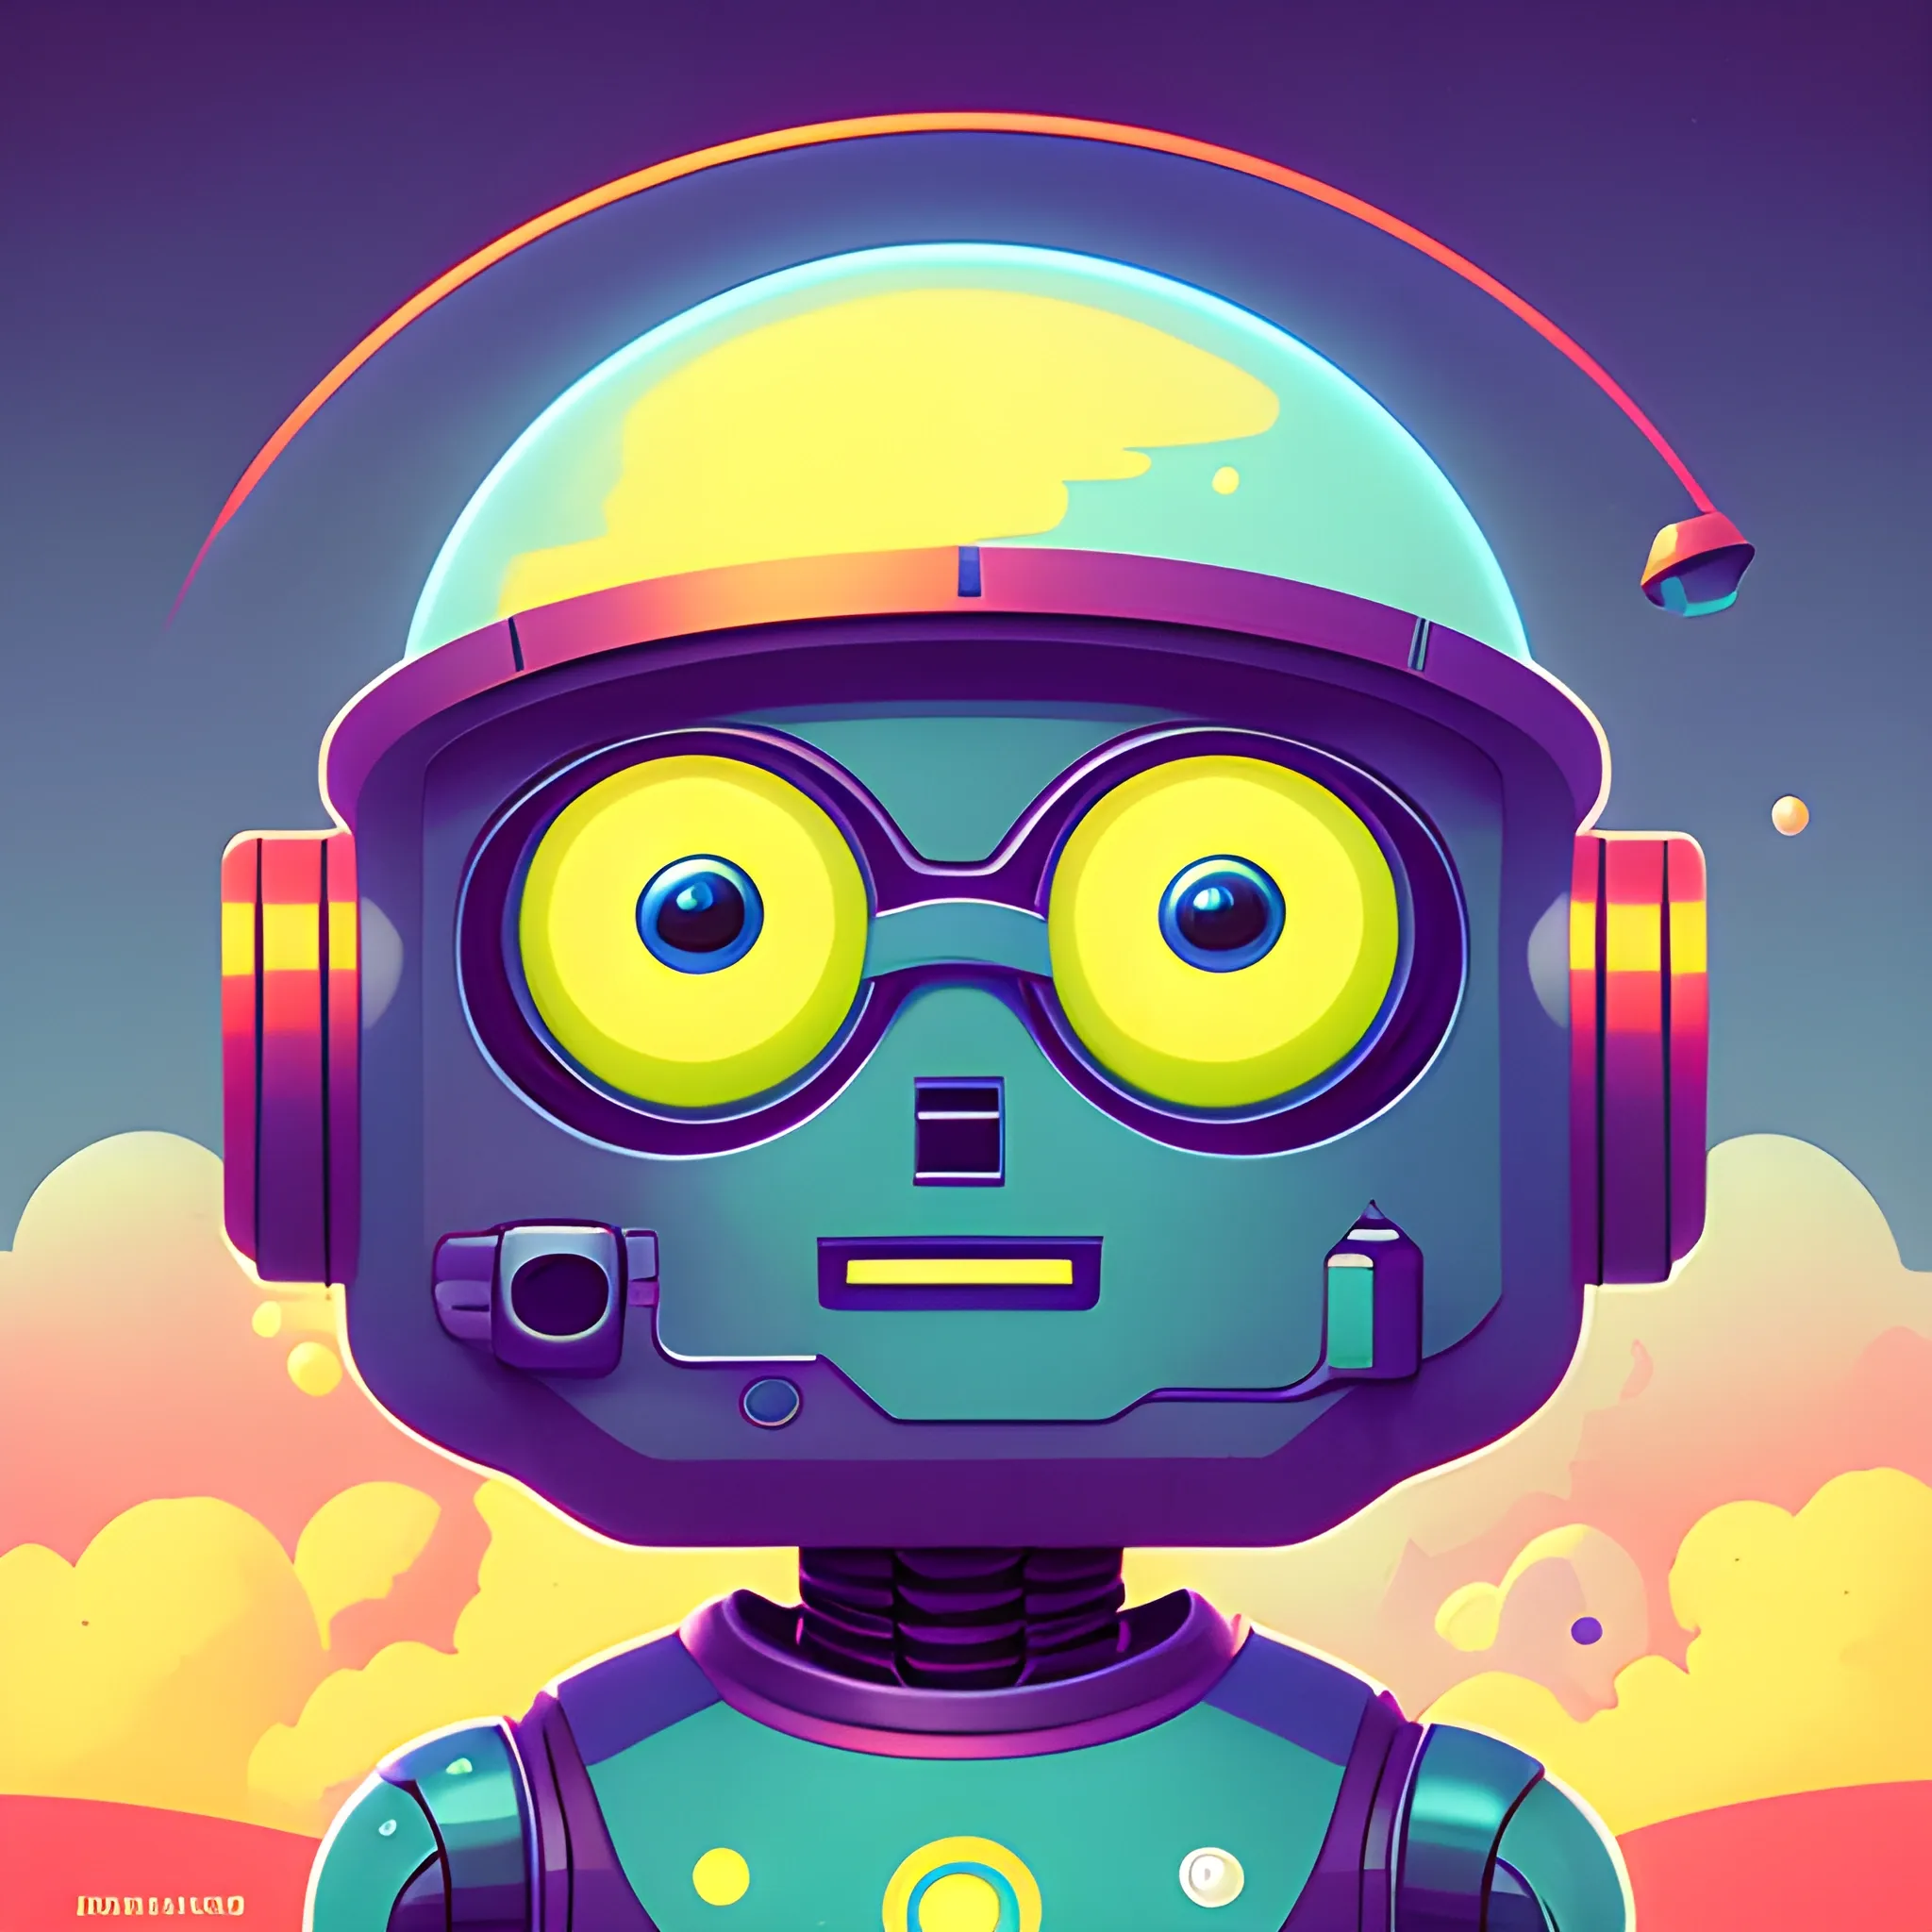 Friendly robot avatar with government or institutional vibes. Should be cheerful, knowledgeable, and friendly. by petros afshar, ross tran, Tom Bagshaw, tom whalen, underwater bubbly psychedelic clouds, Anaglyph 3D lens blur effect
